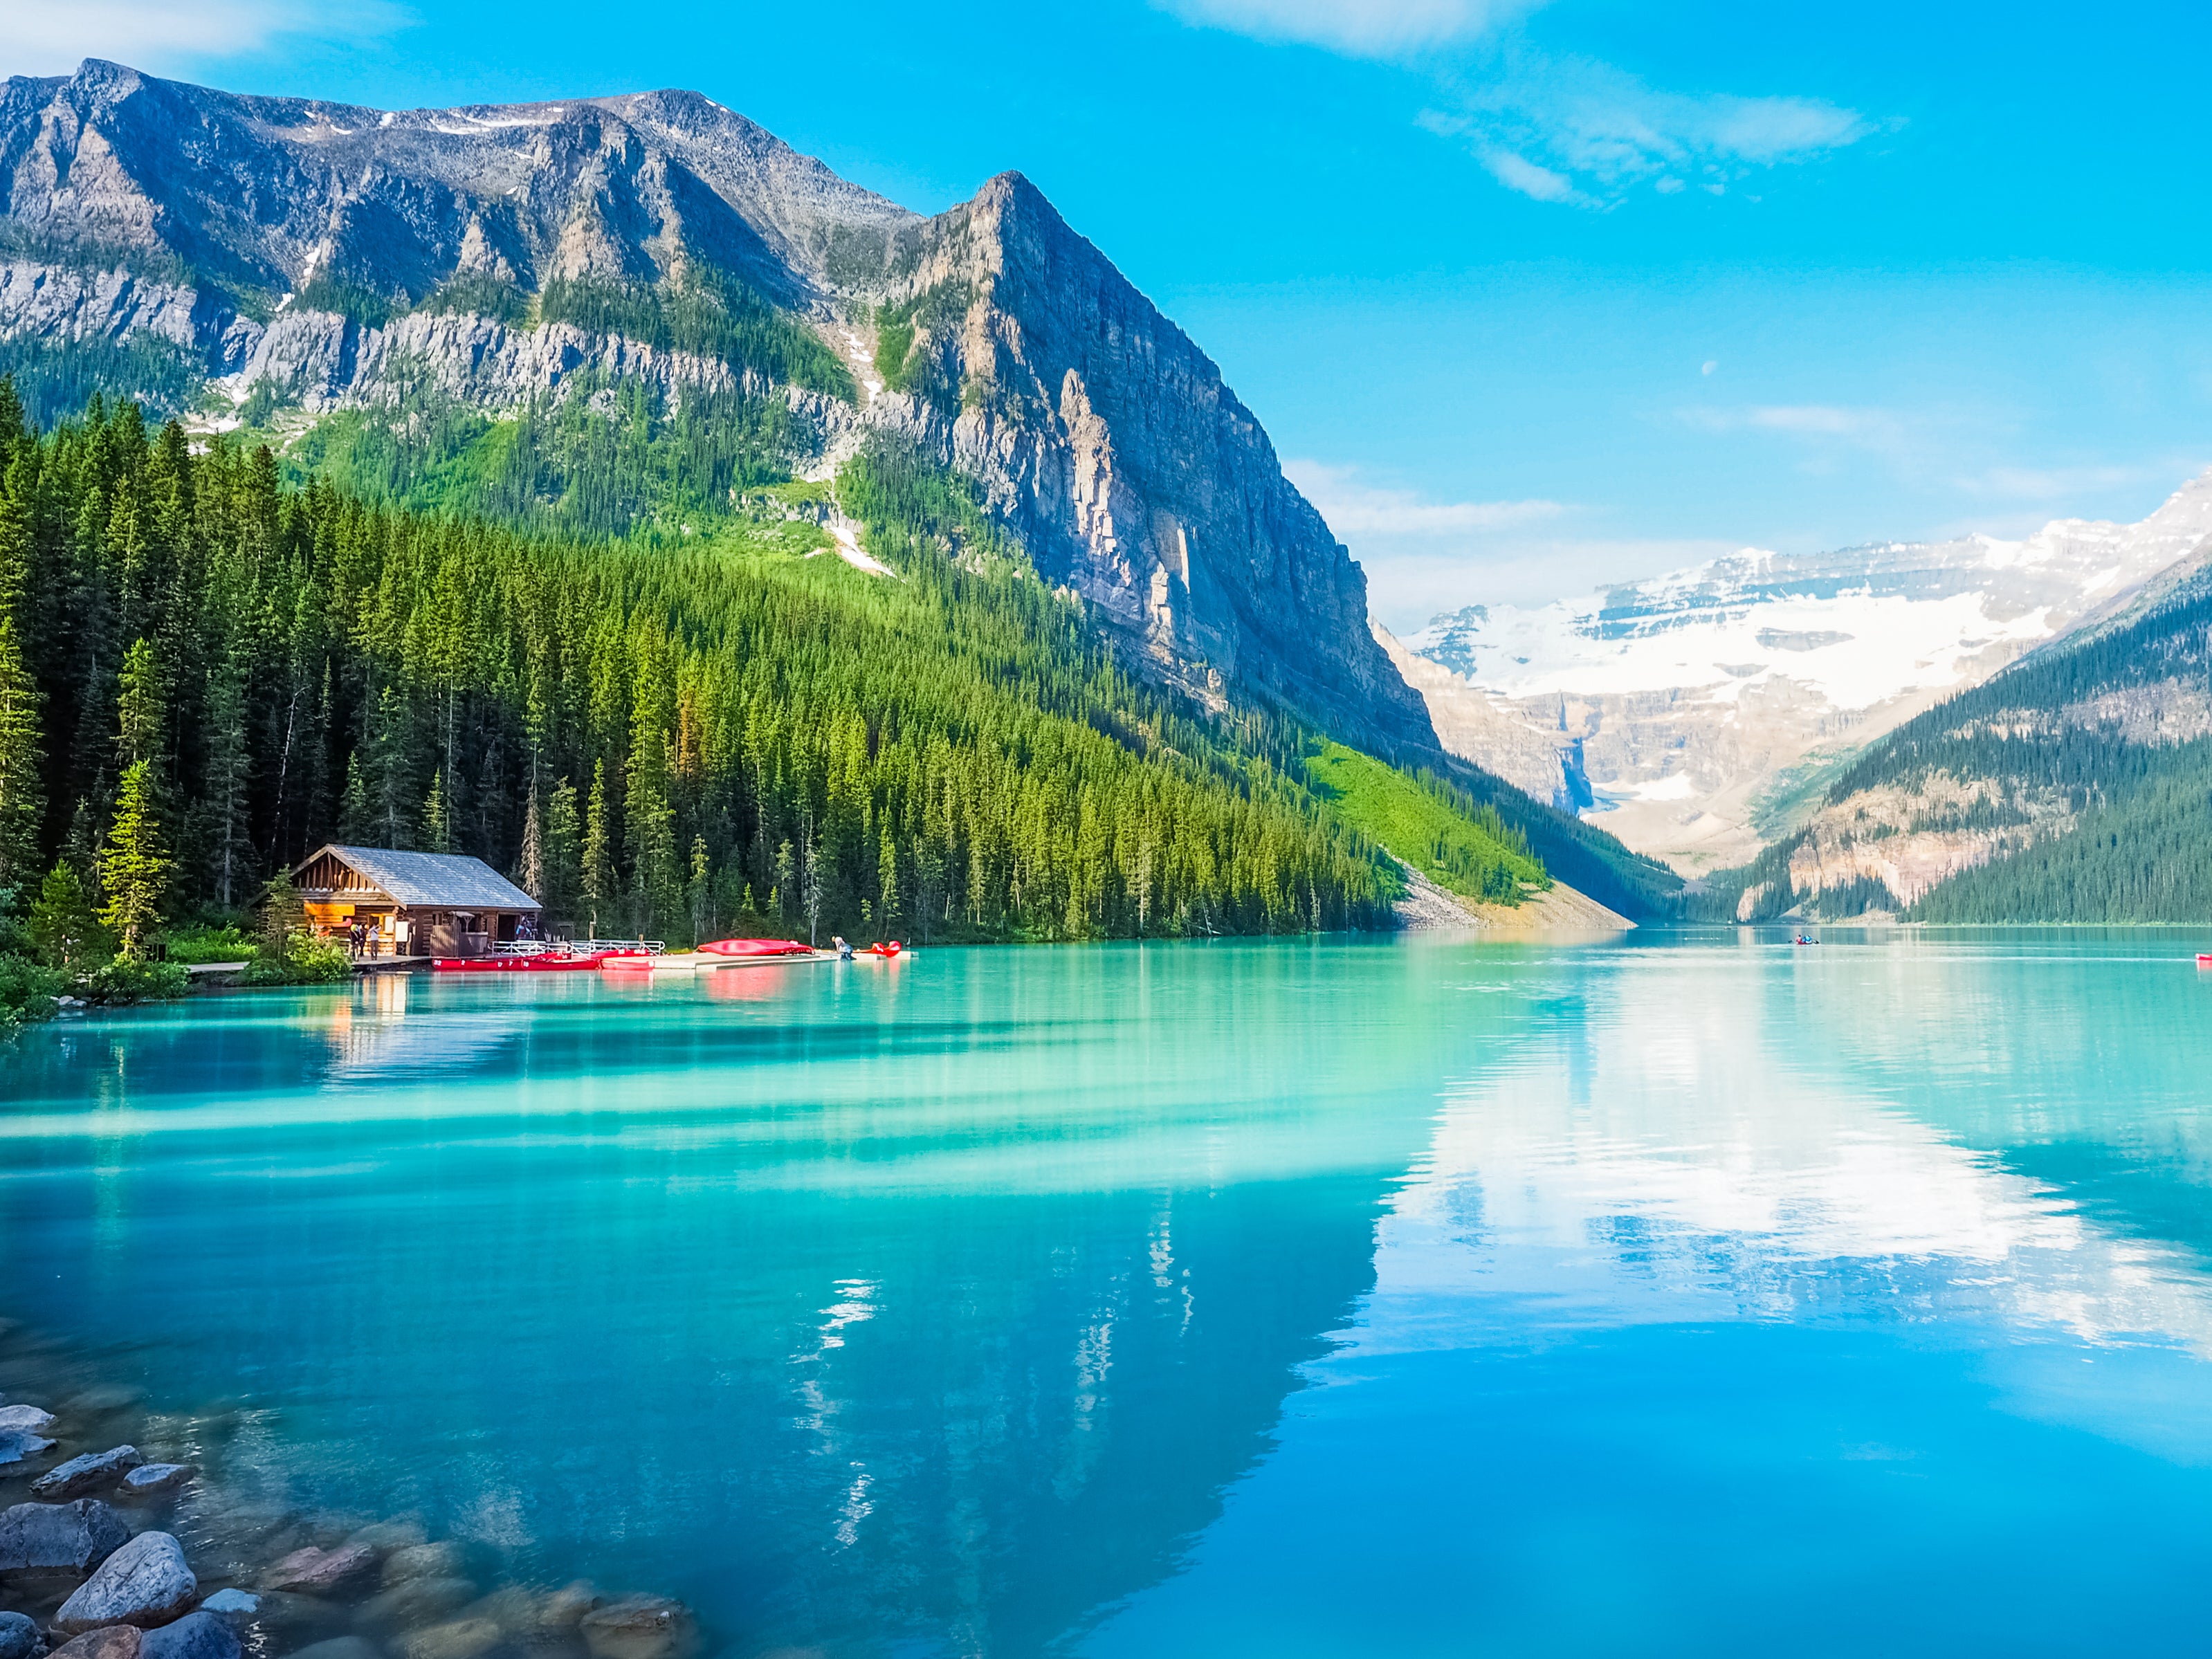 Canada’s Banff National Park is among the destinations visited on the long cruise itinerary